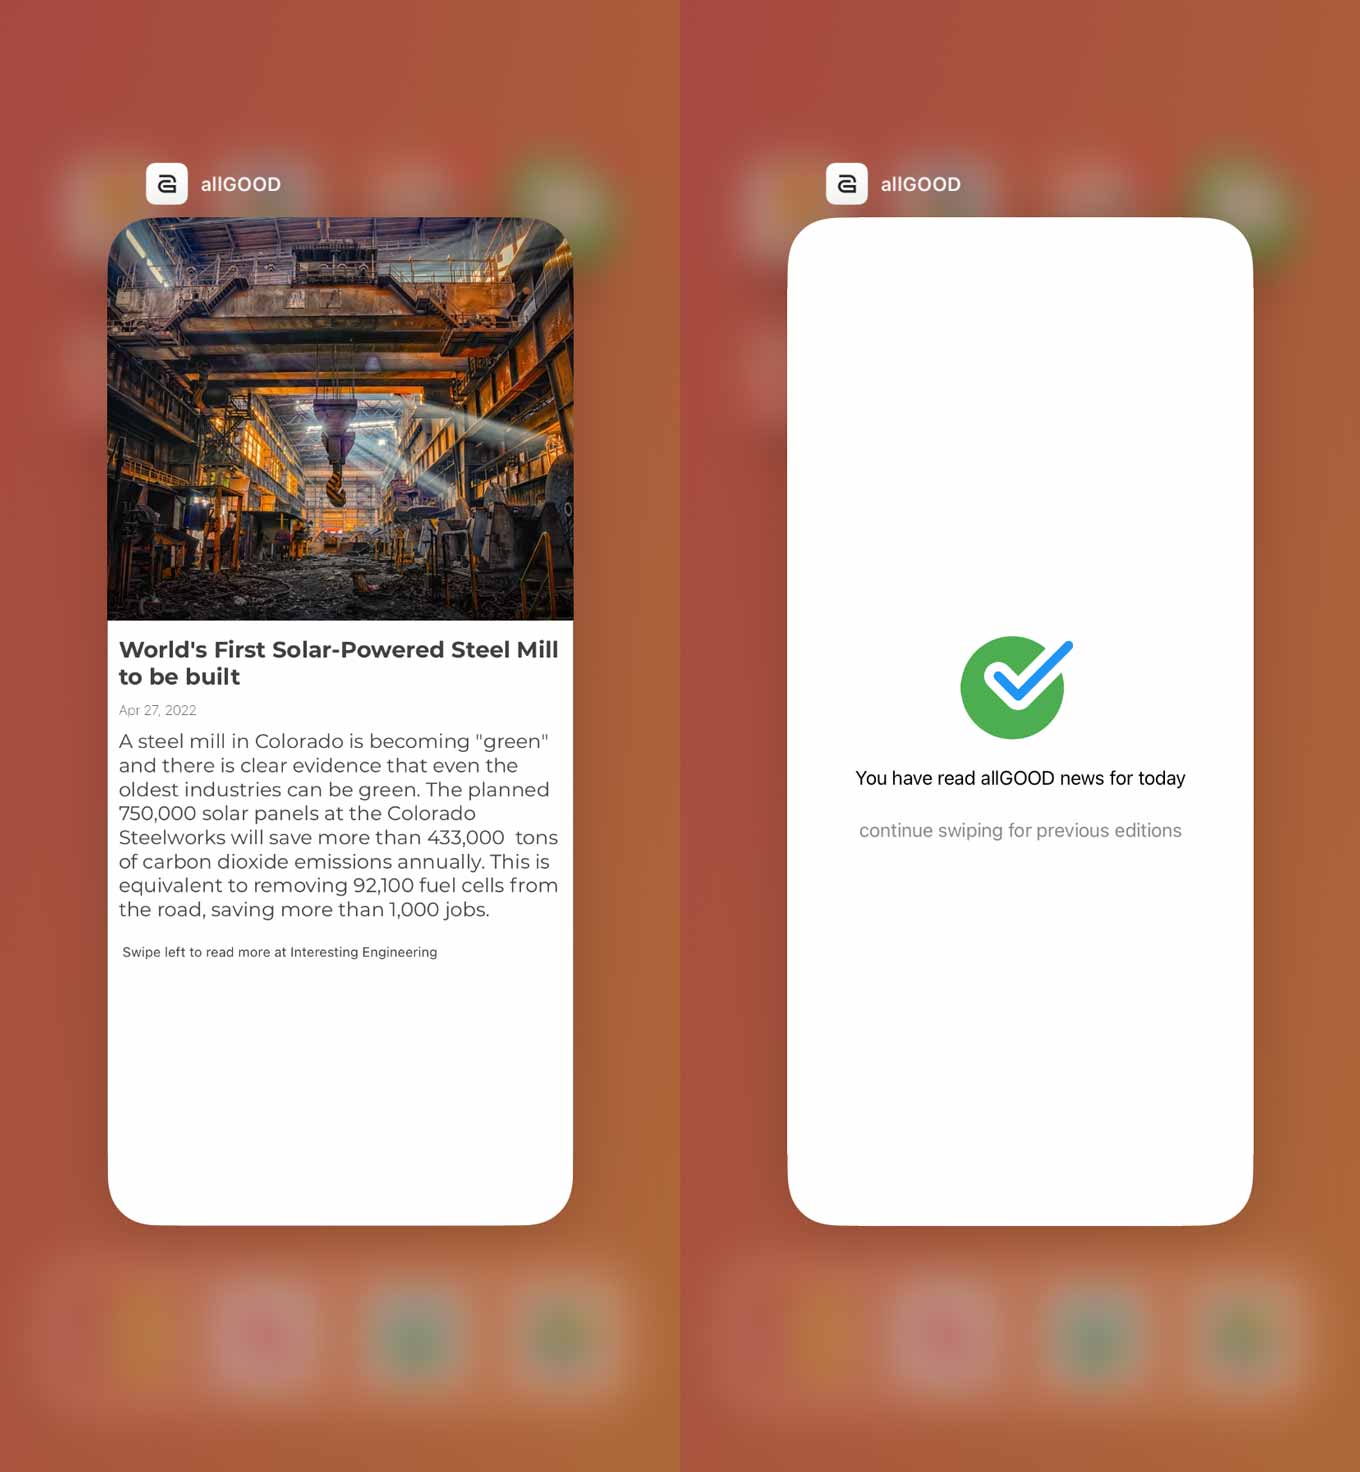 Good News App allGOOD NEWS, showing an article about the world's first solar-powered steel mill to be built - and a screen saying "you have read allGOOD news for today"